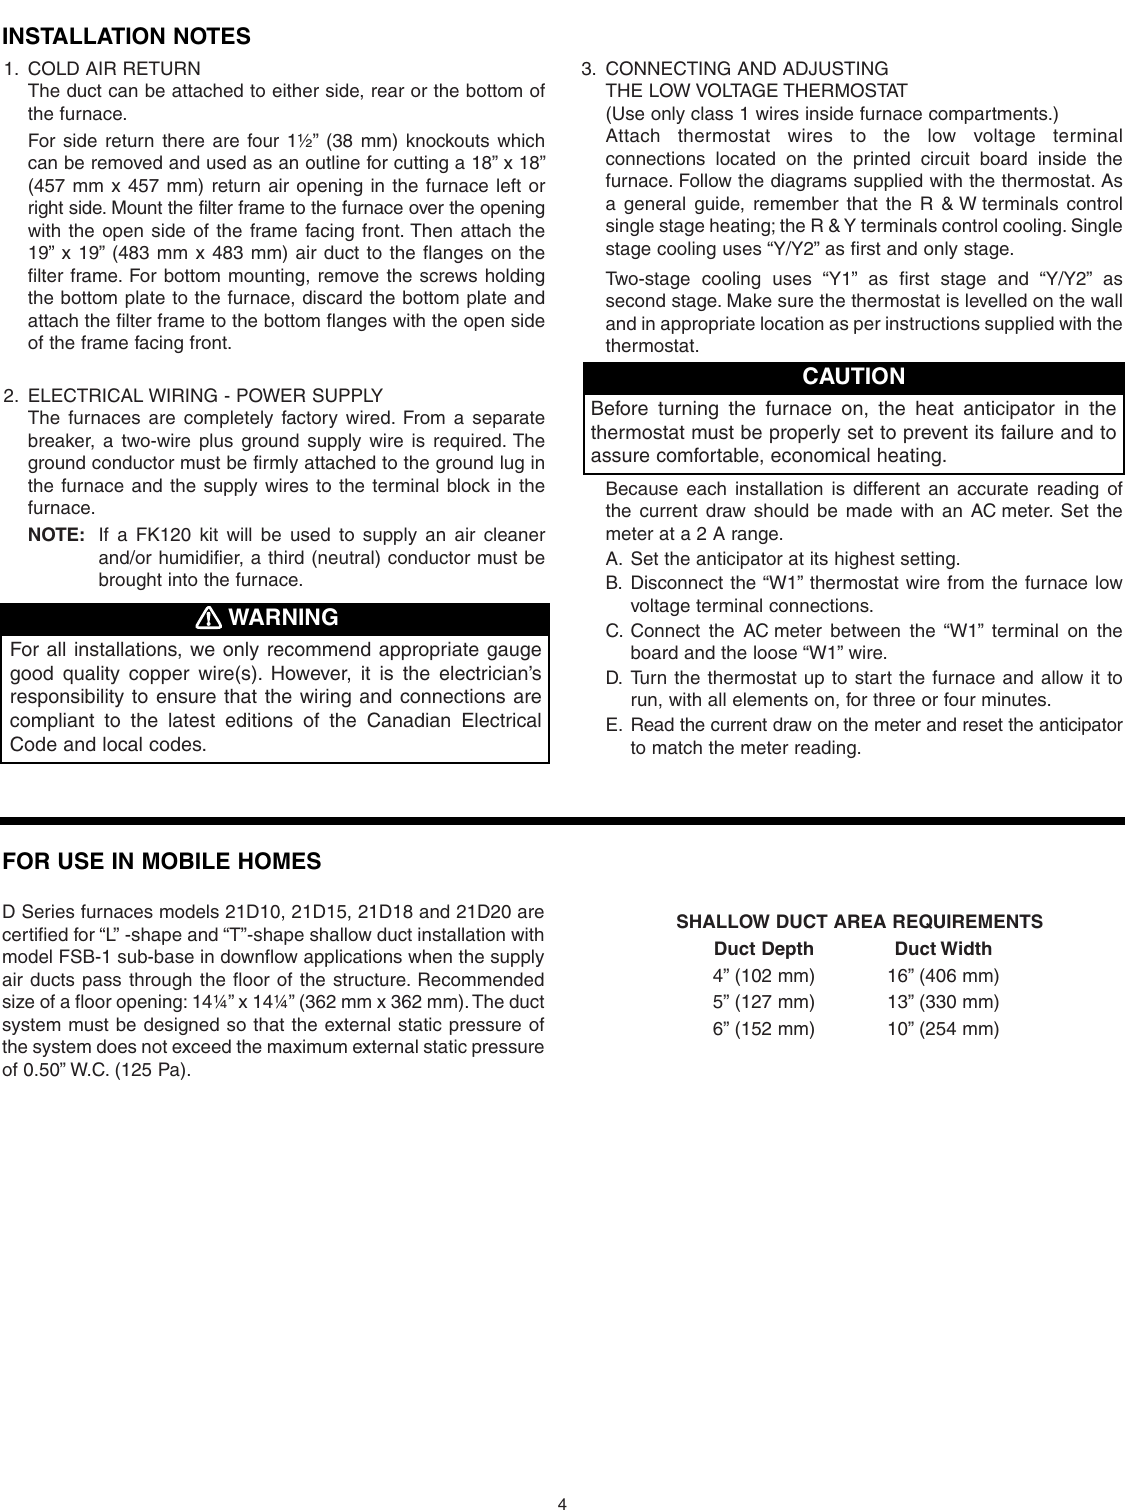 Page 4 of 10 - Broan Broan-Furnace-30042432A-Users-Manual- D Series Nortron Electric Furnaces Installation Manual (30042432A)  Broan-furnace-30042432a-users-manual